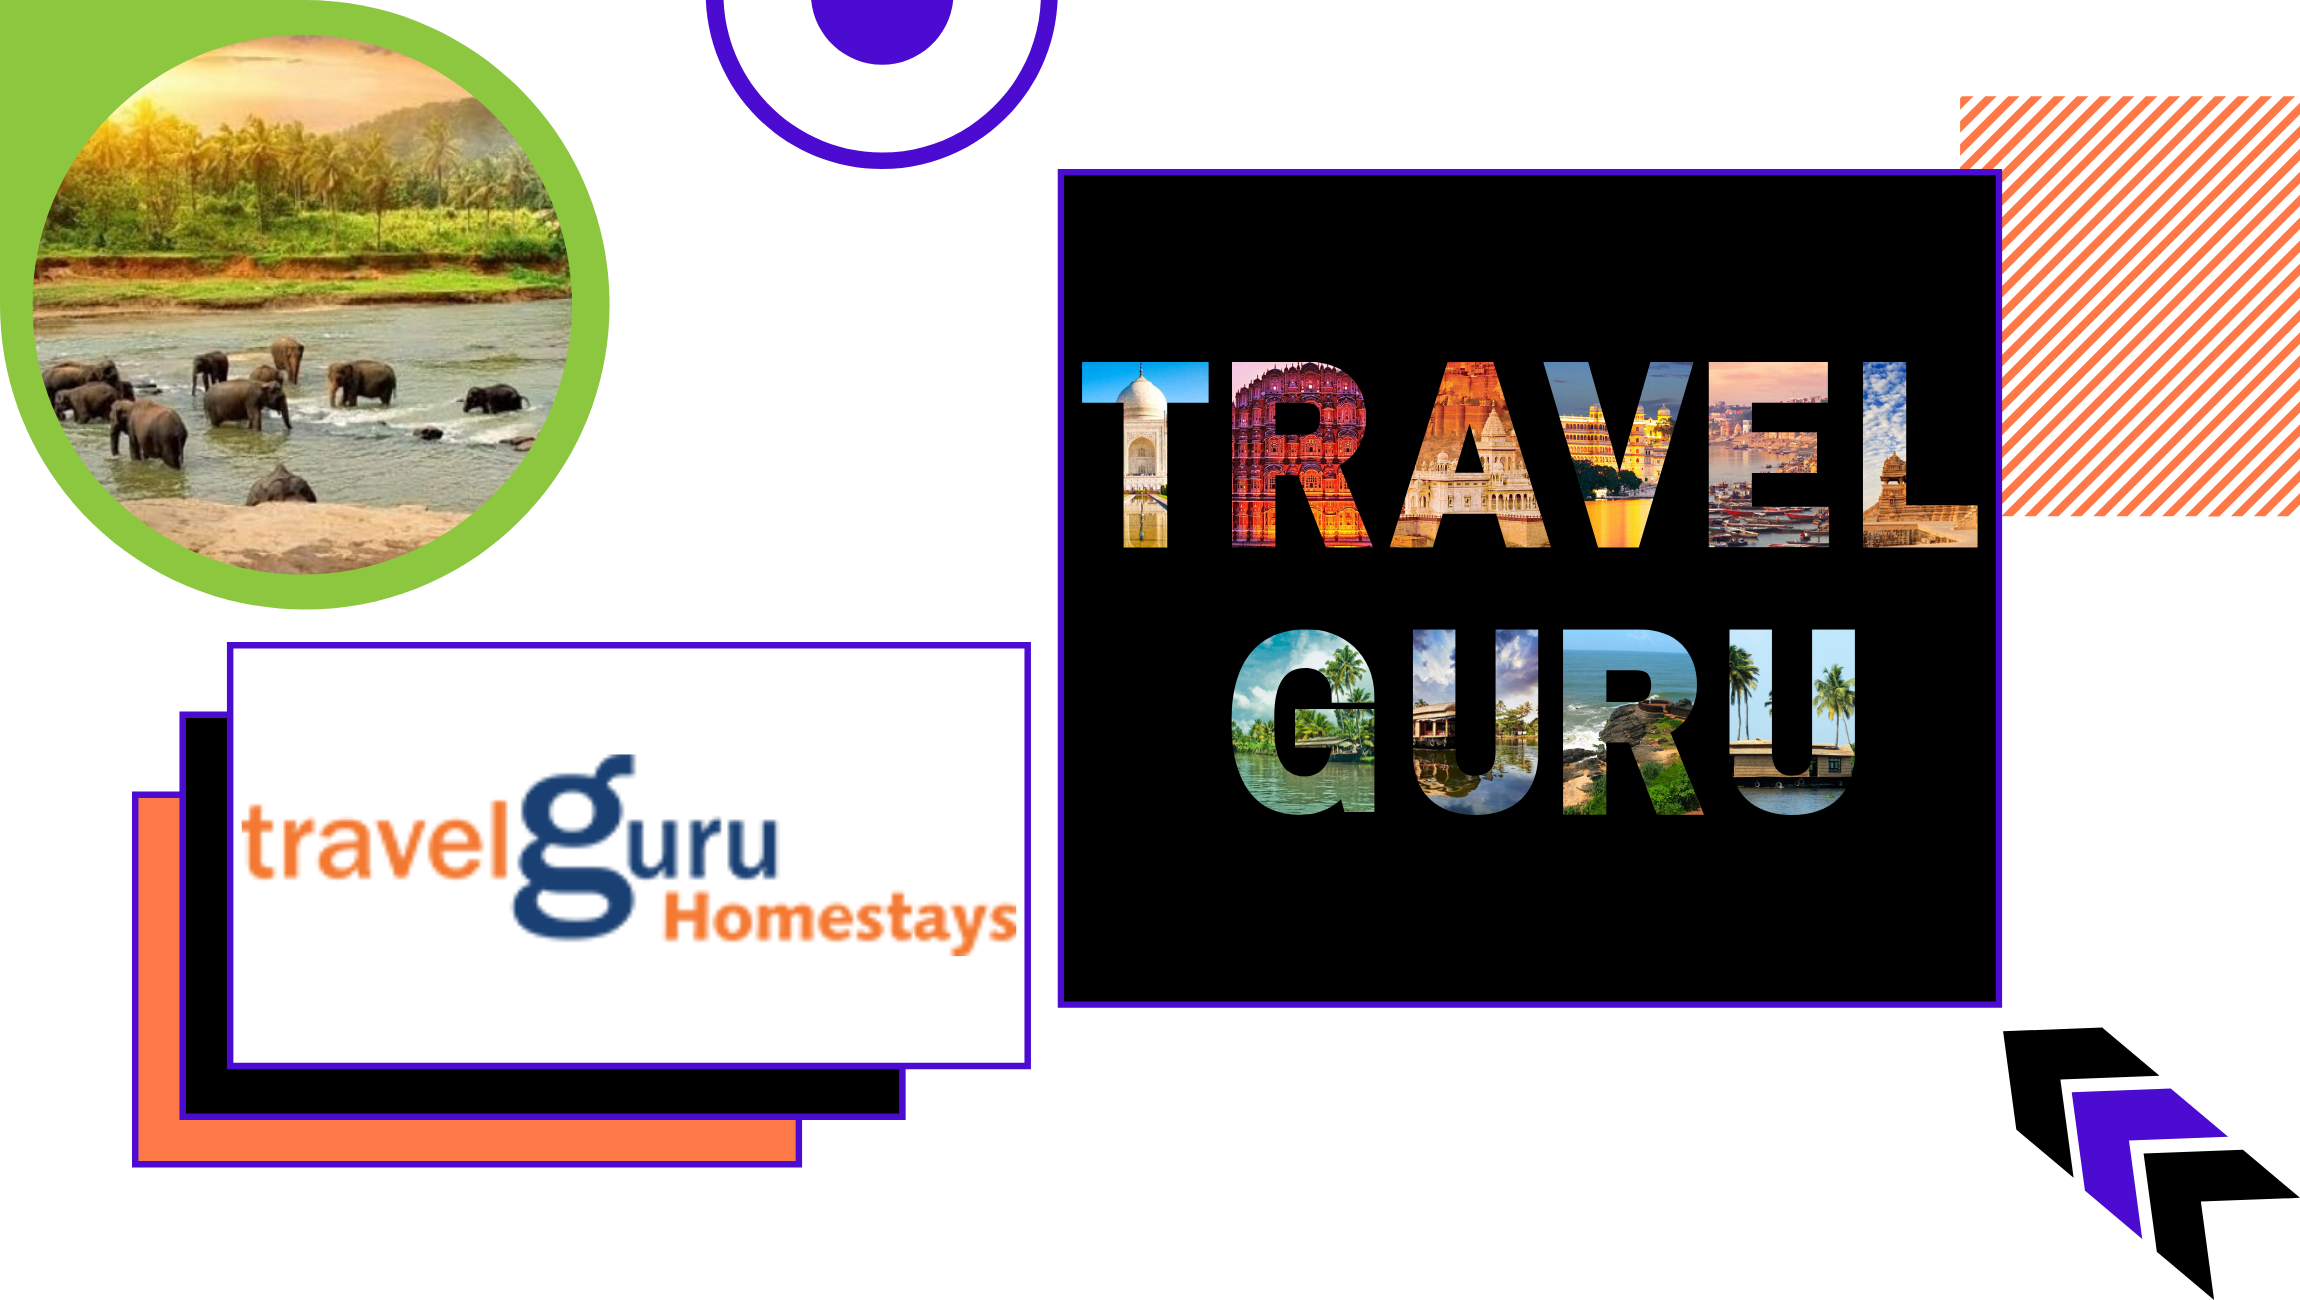 travel planner in india